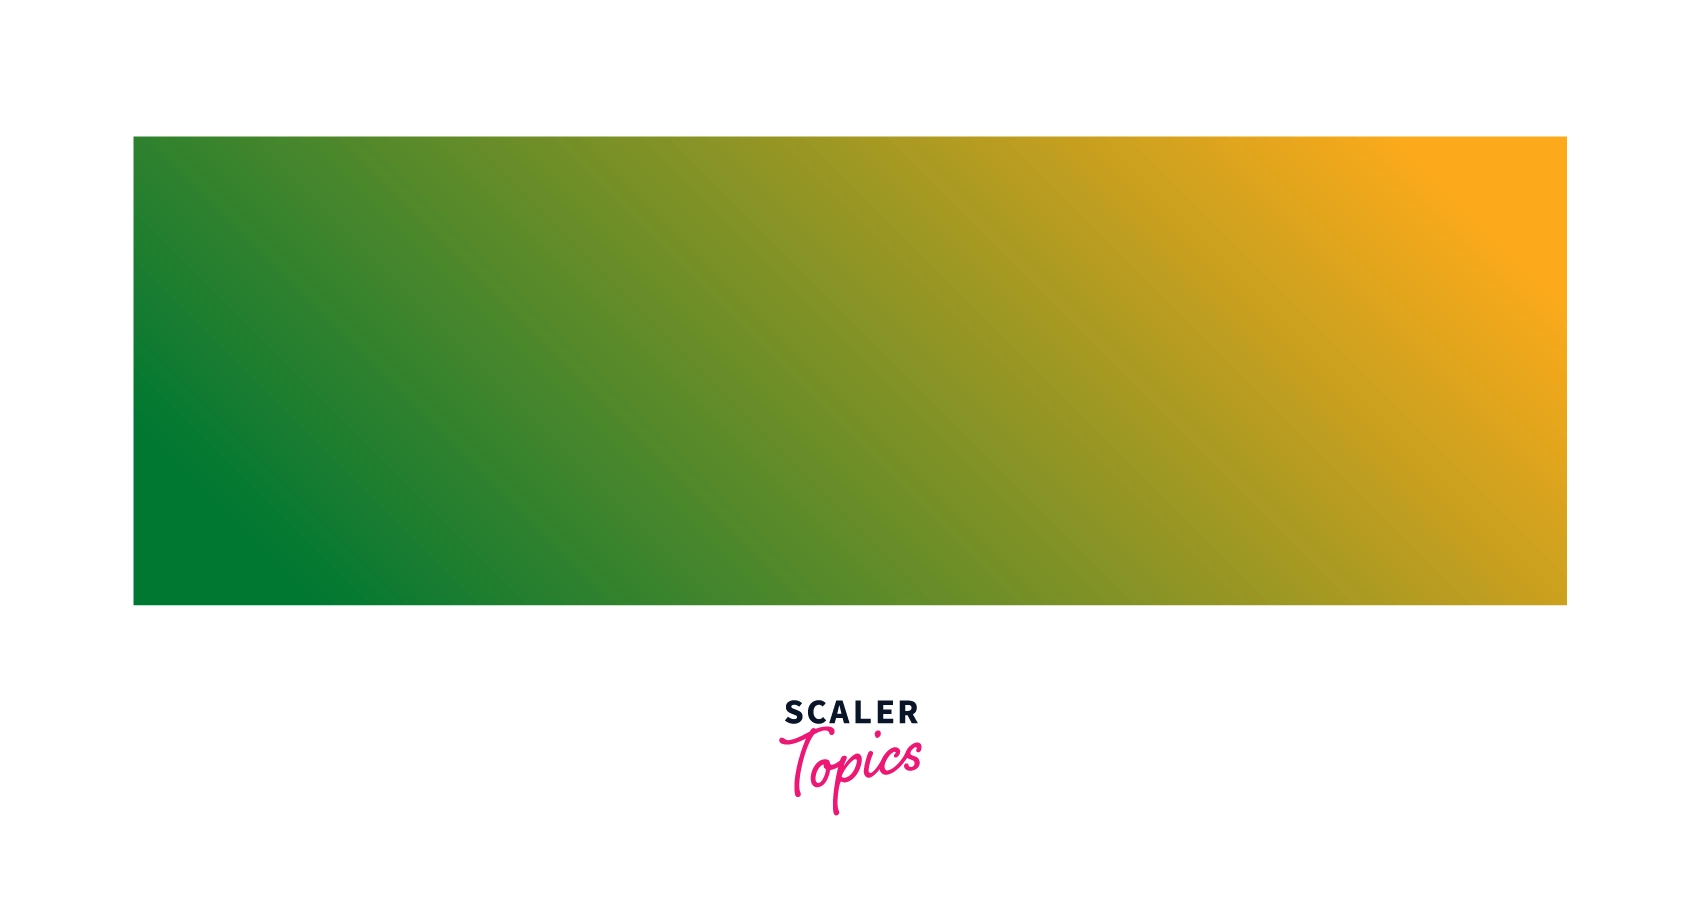 linear gradient transition between green and yellow at an angle of 45 degrees